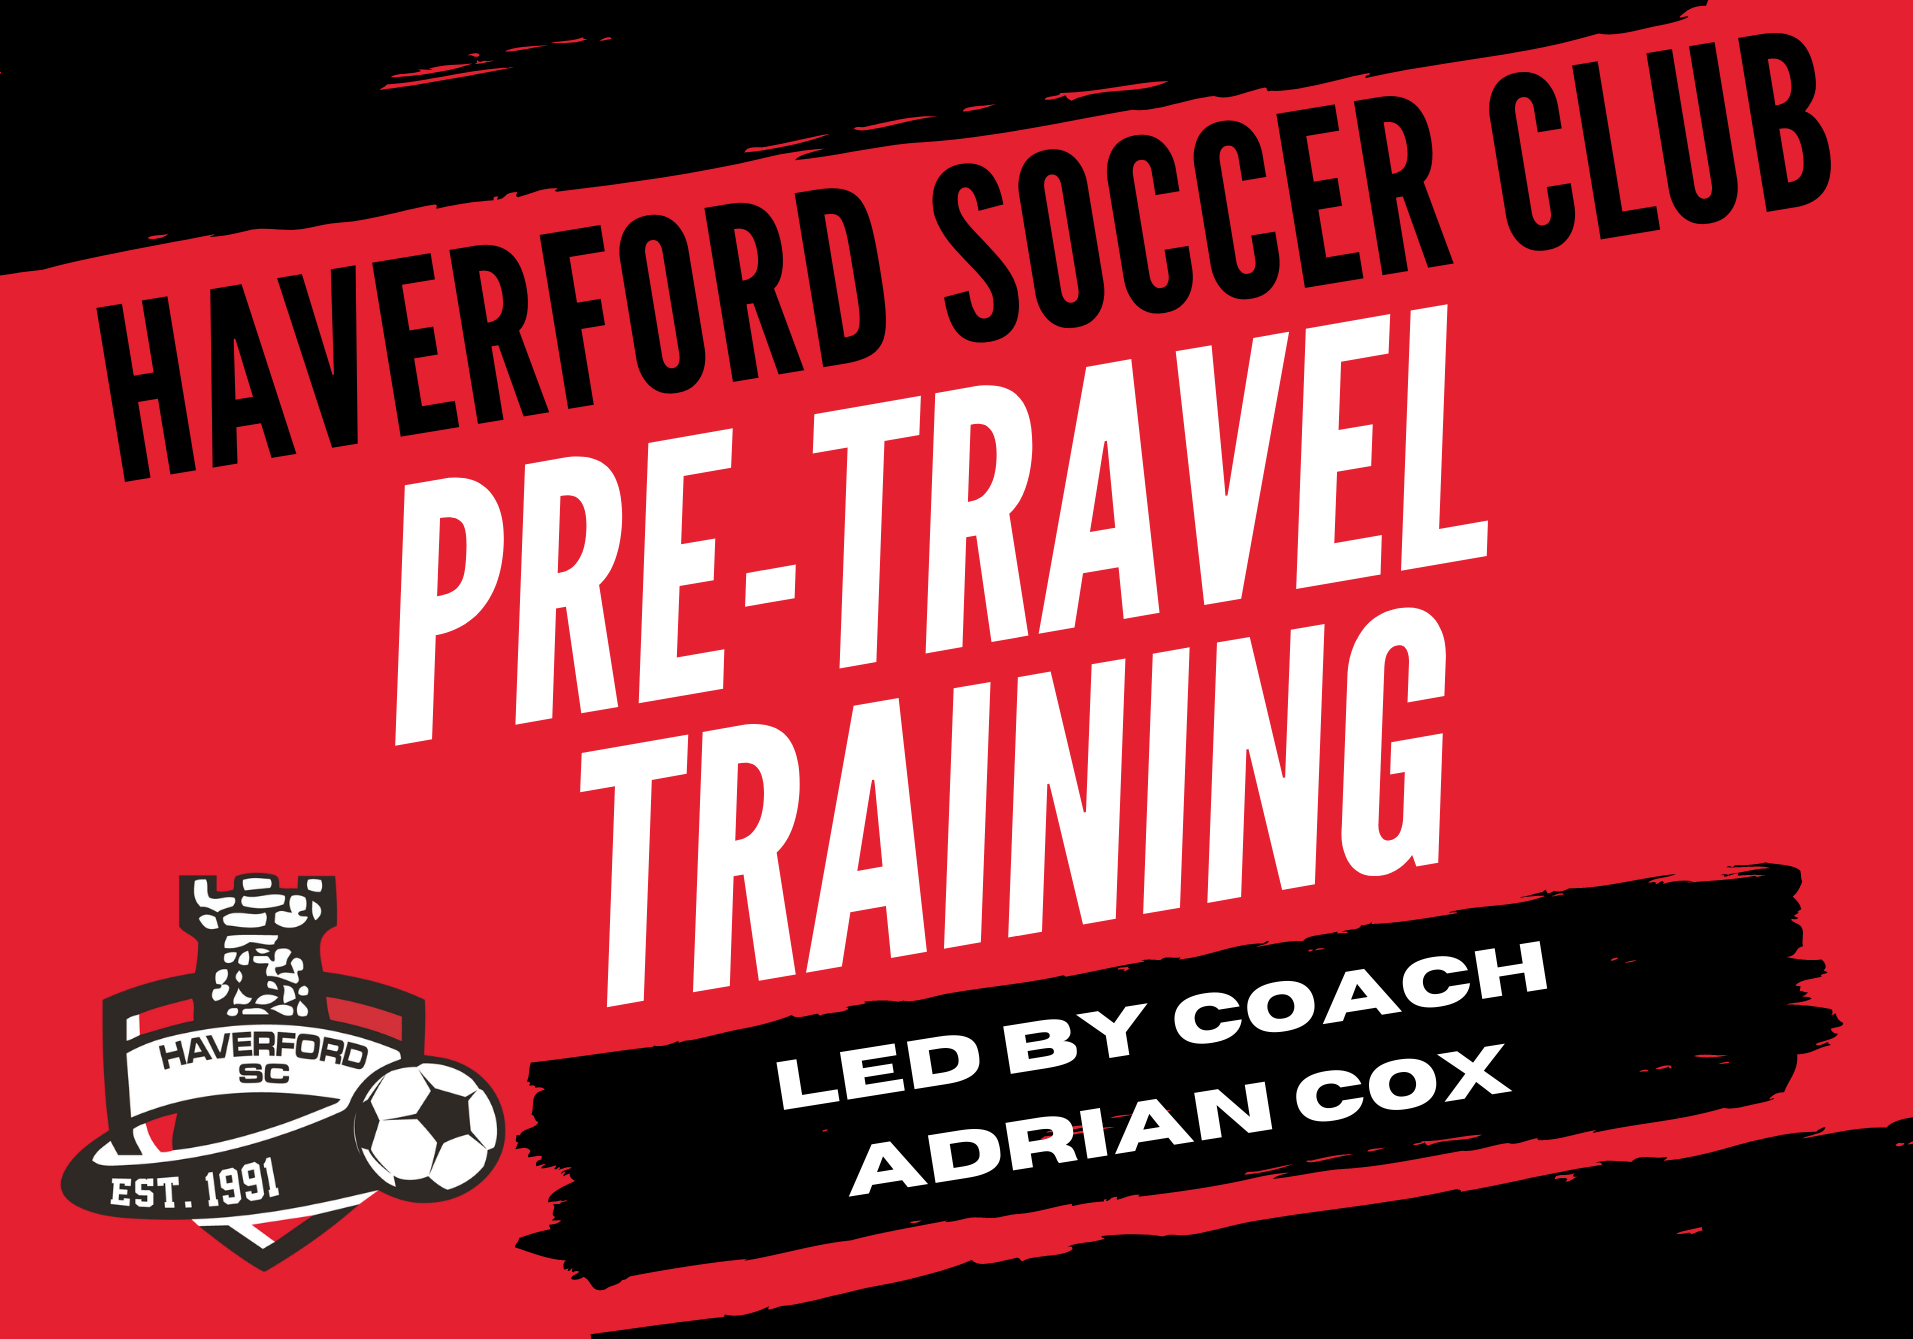 Pre- Travel Training with Coach Adrian Cox